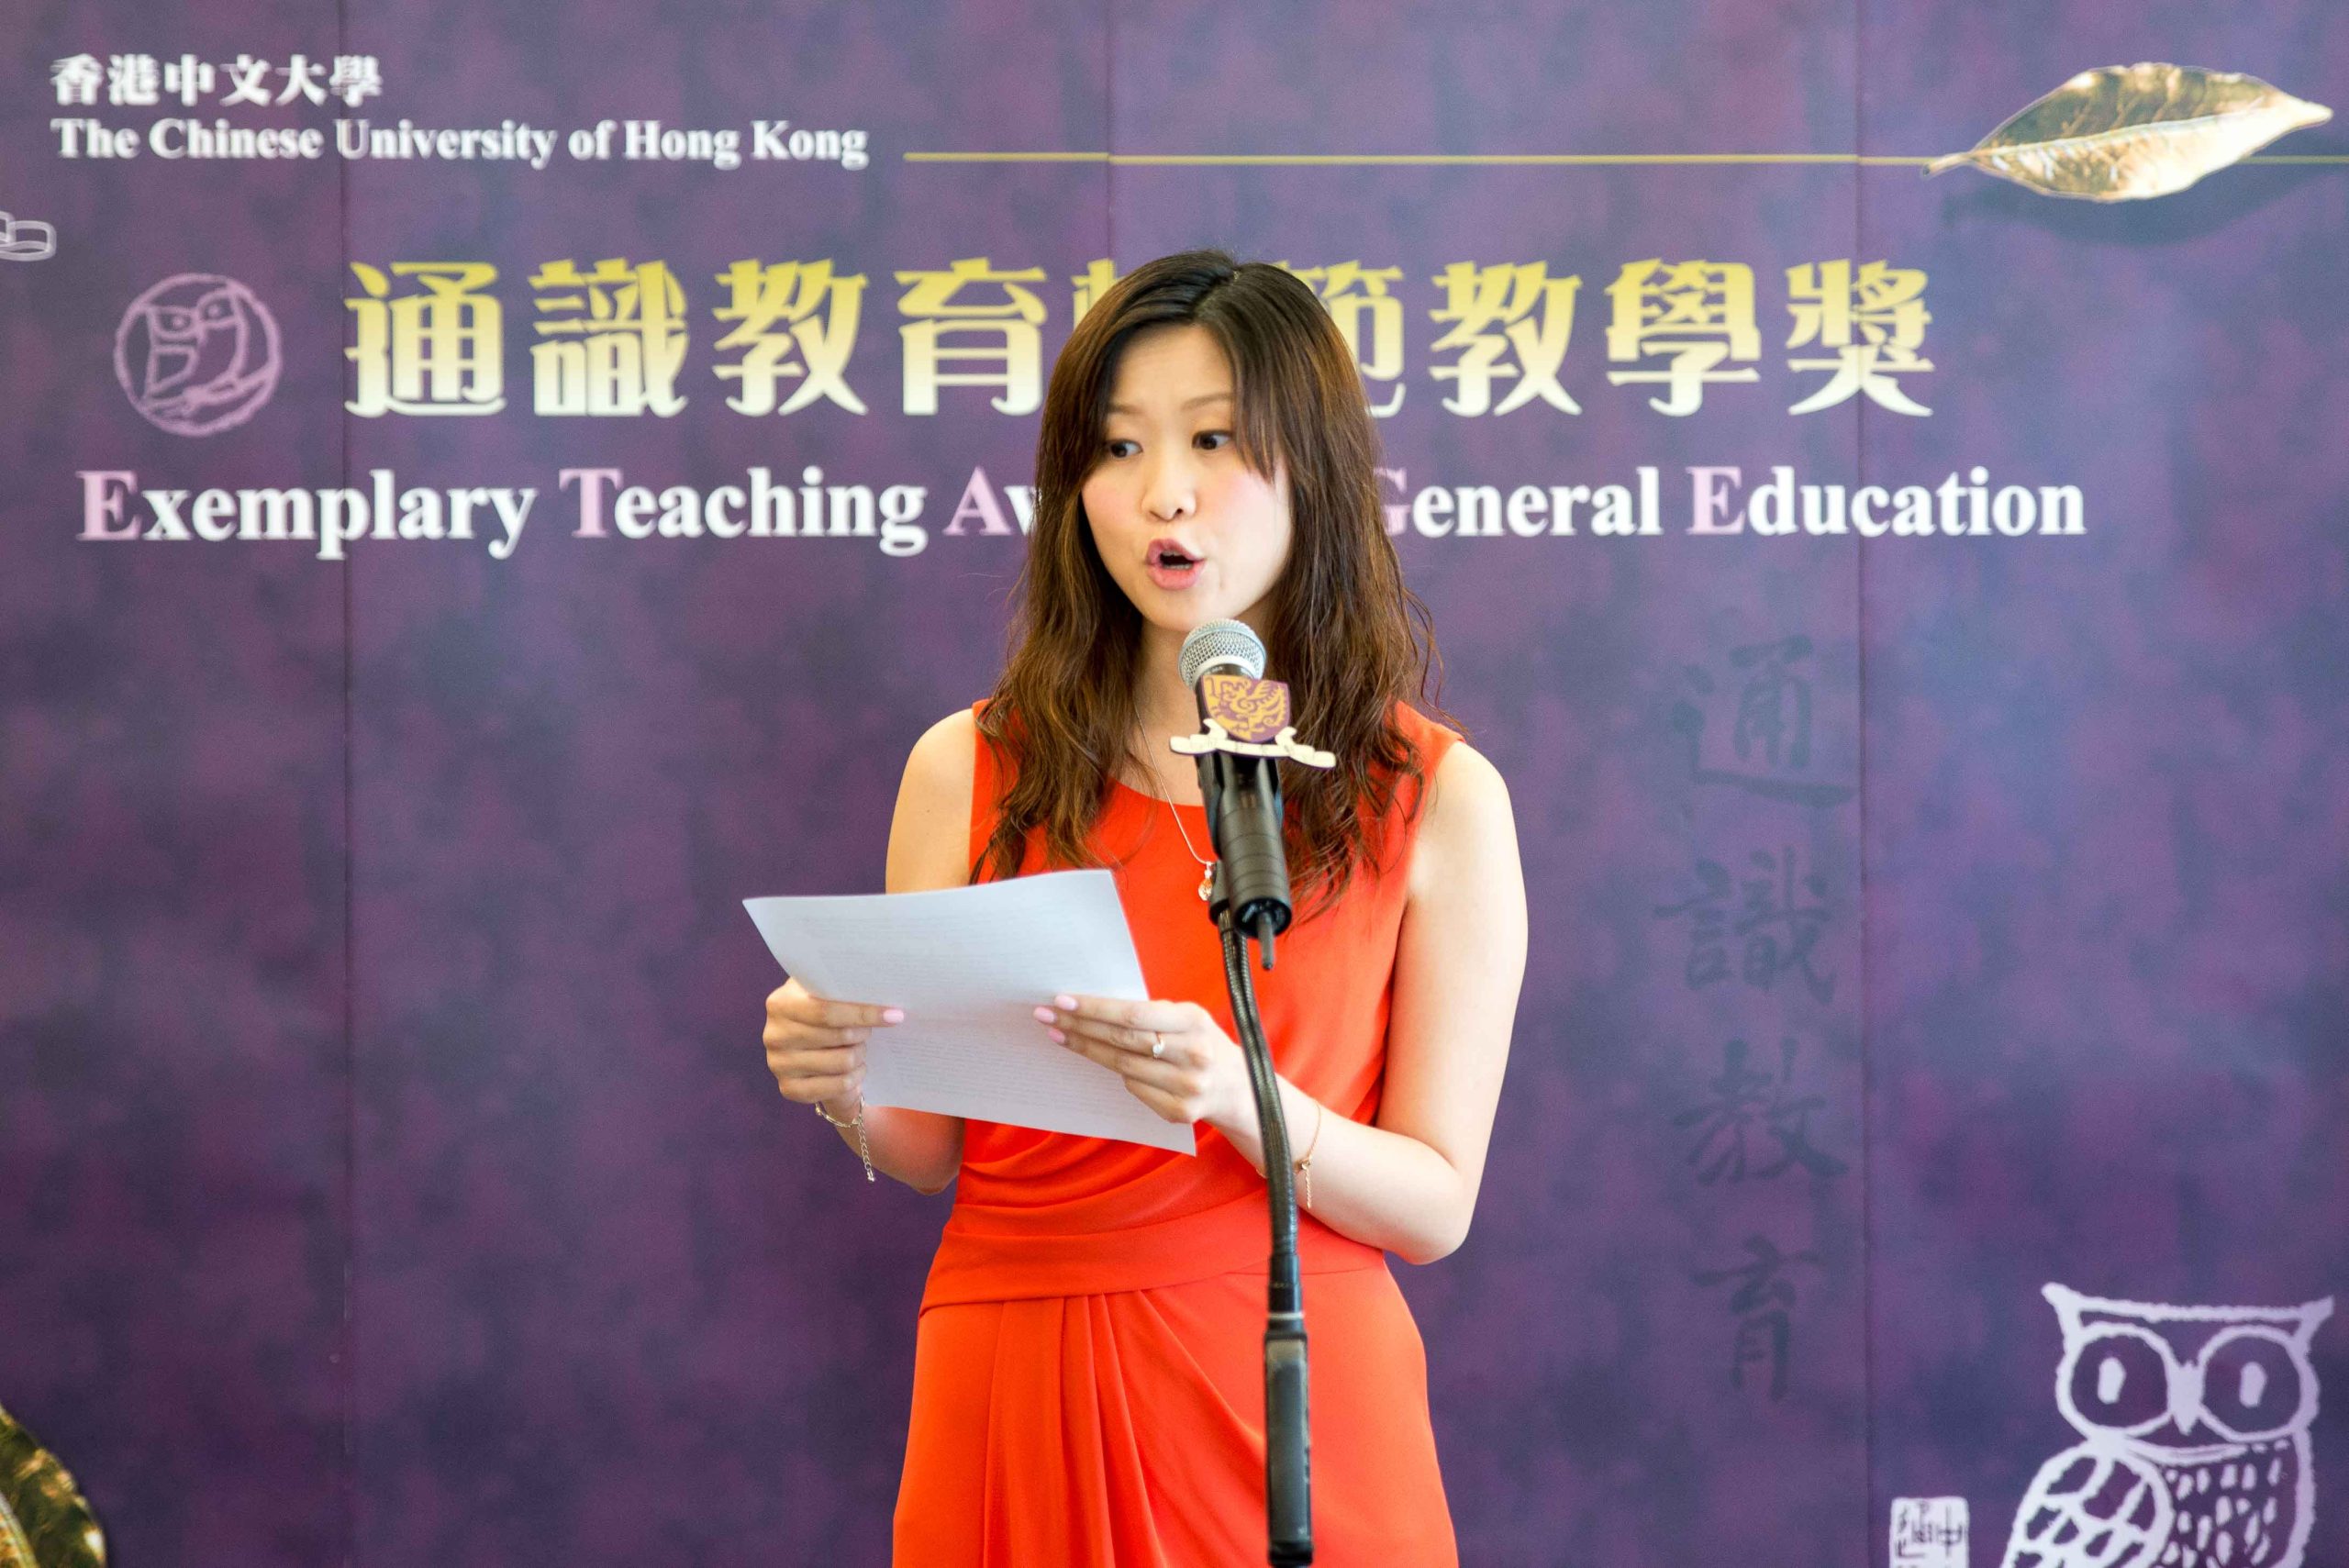 Speech by awardee Dr. Lee Kit Ying Rebecca, School of Biomedical Sciences